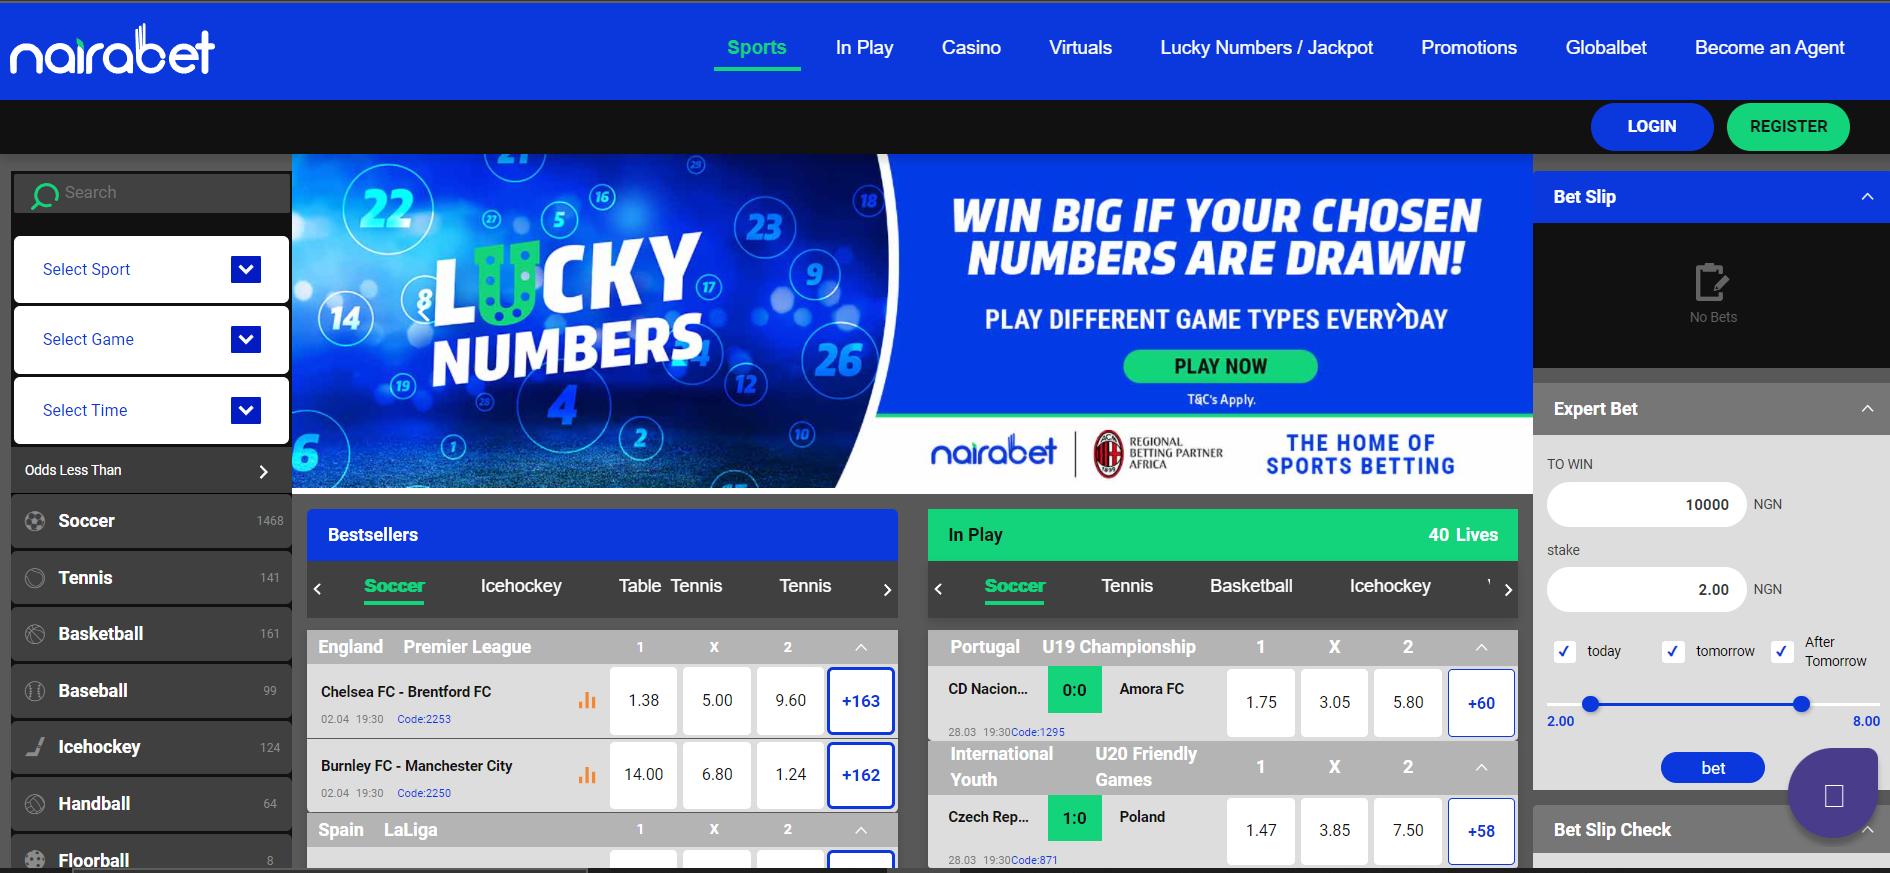 Niarabet offers sports betting and numerous promotions to its registered customers.